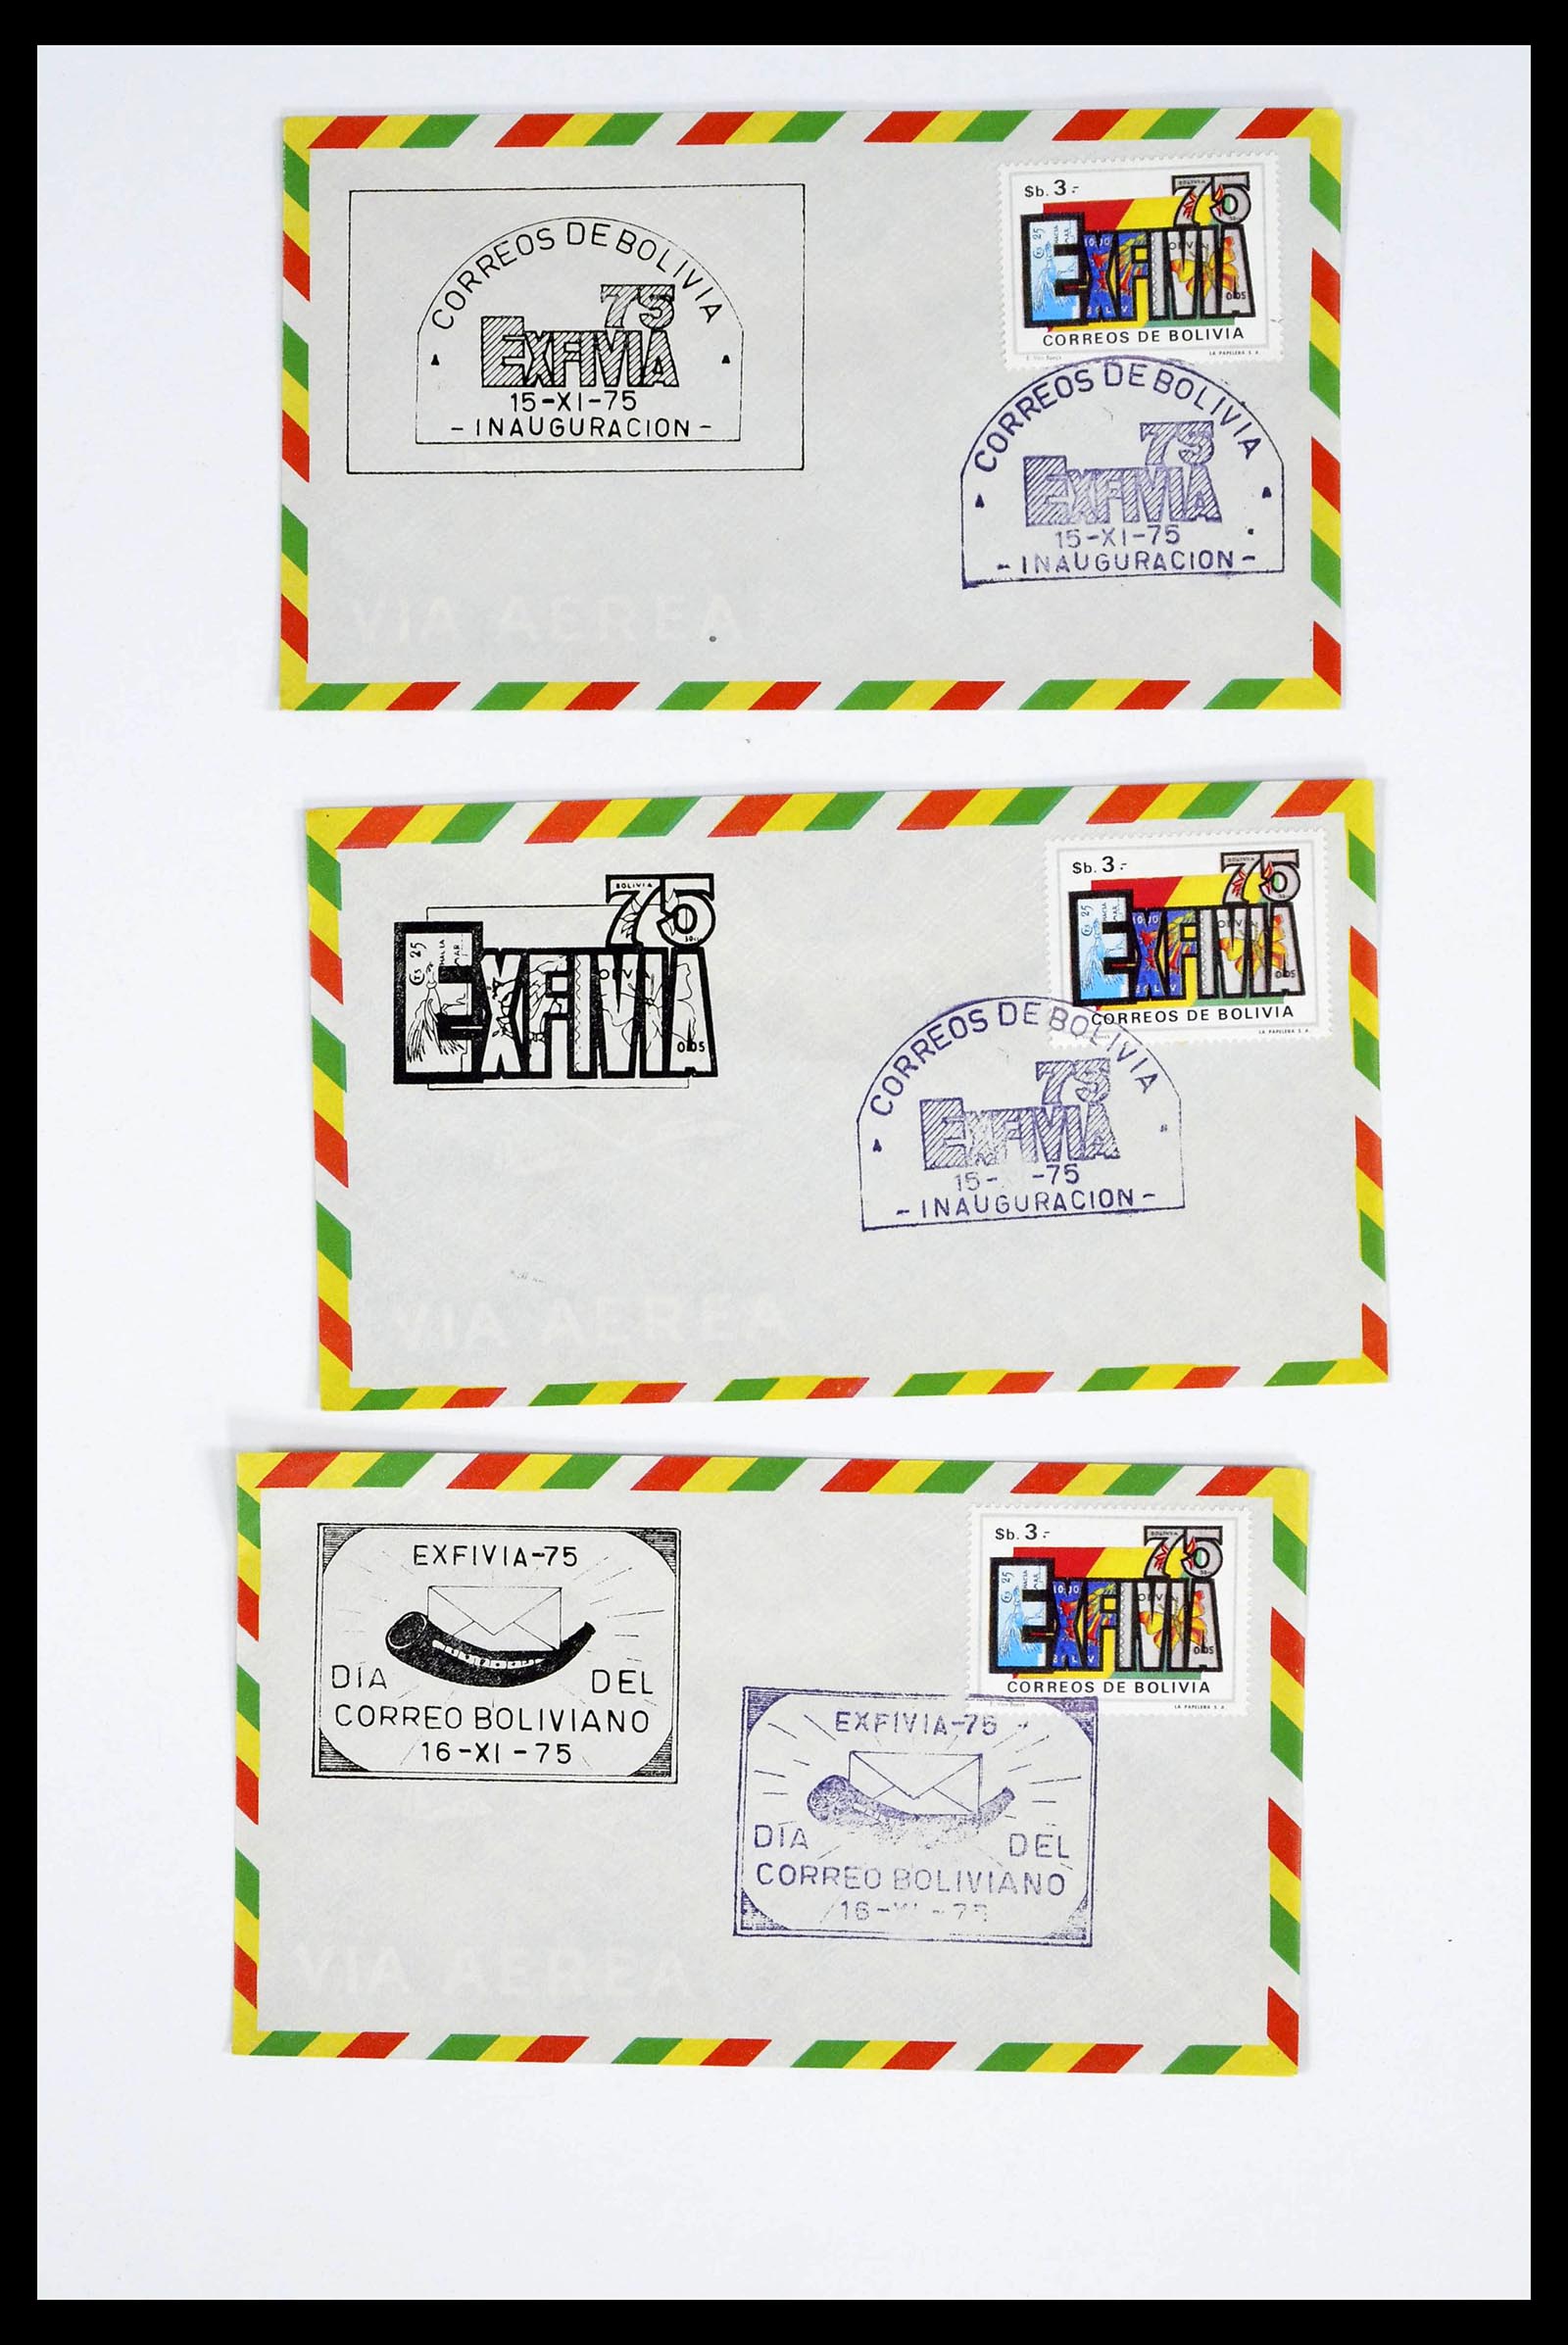 39271 0025 - Stamp collection 39271 Bolivia covers 1950-1980.